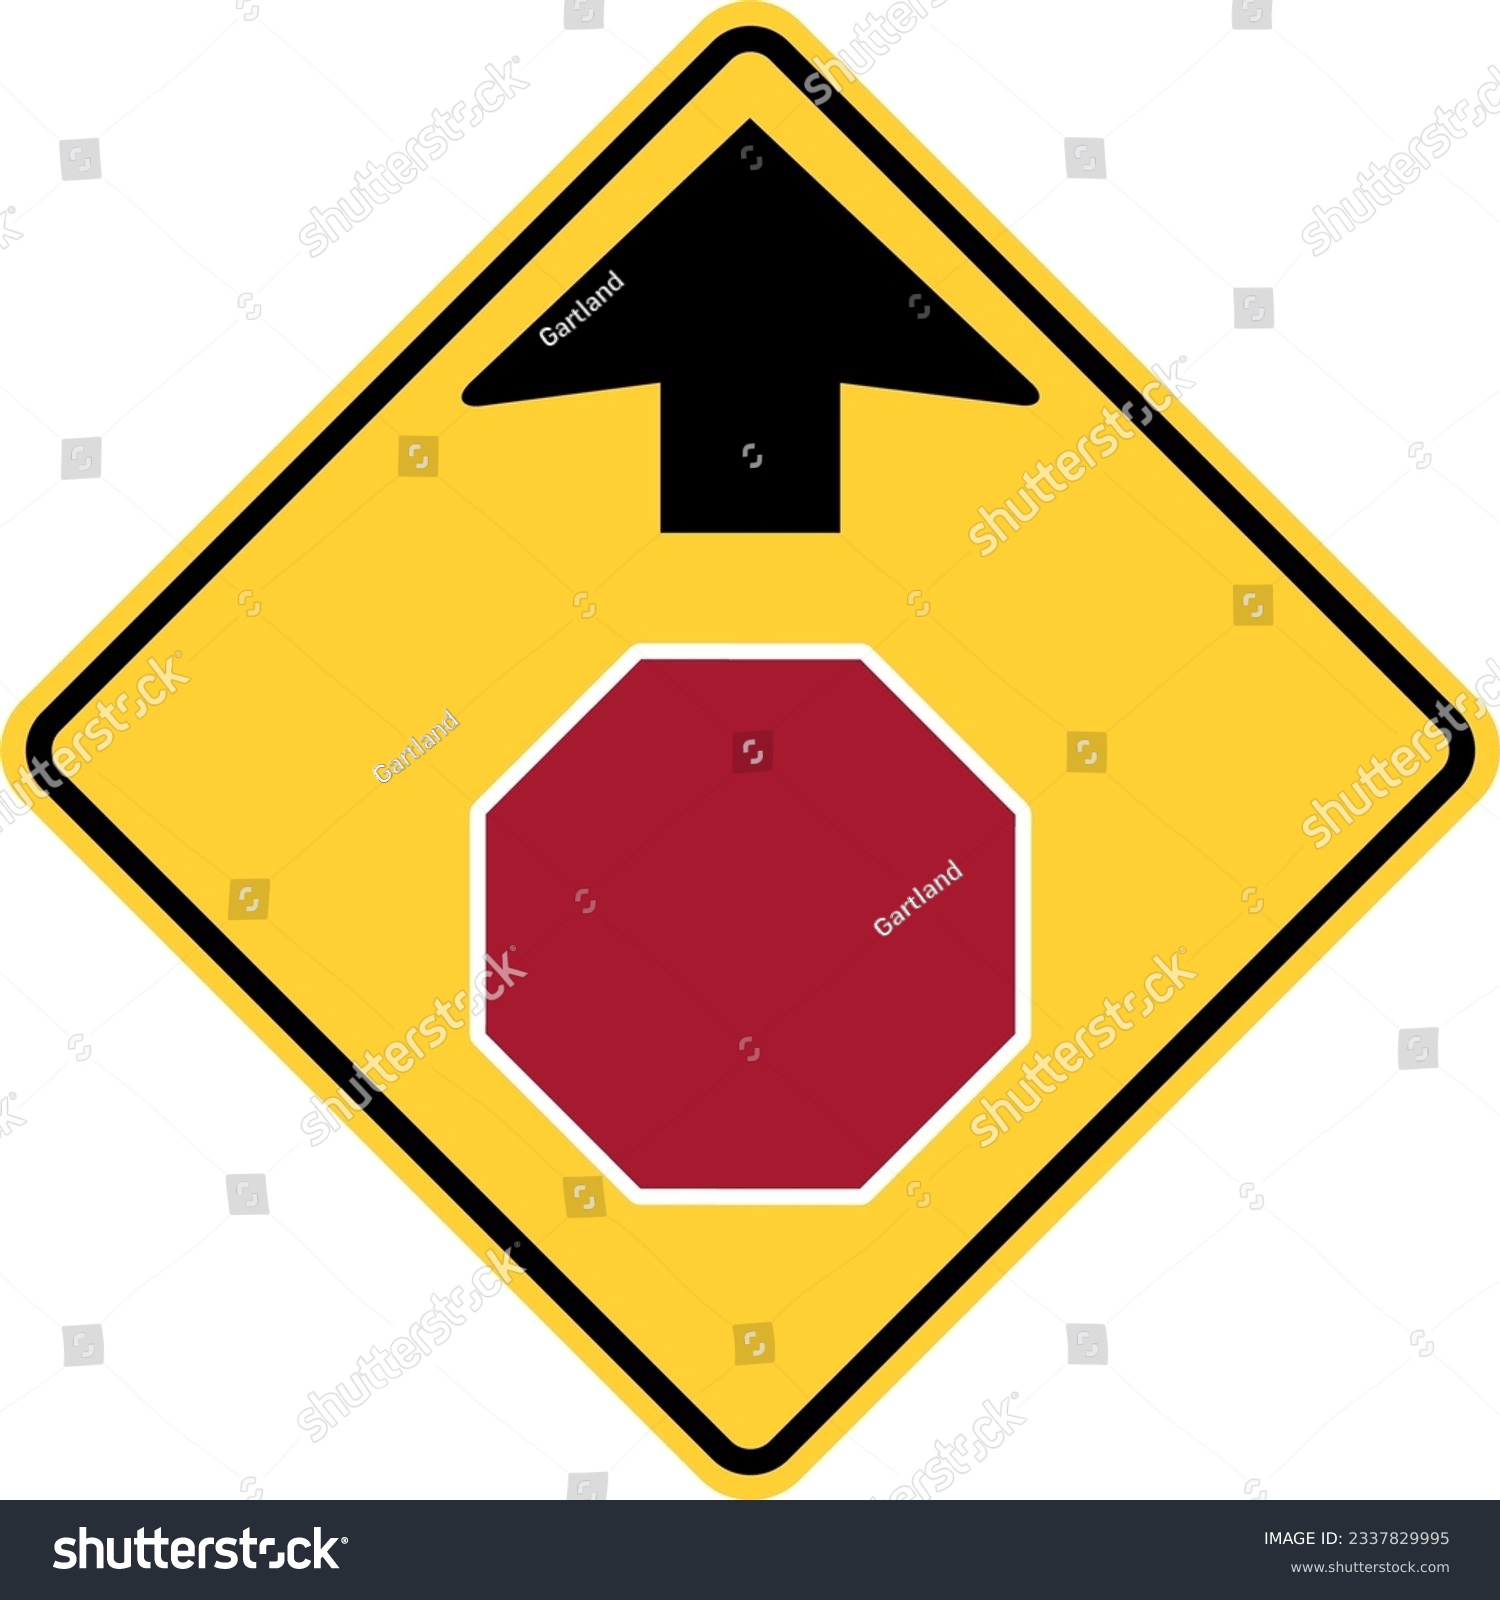 SVG of Vector graphic of a usa stop ahead highway sign. It consists of a black upward pointing arrow above a red hexagon with a white border within a black and yellow square tilted to 45 degrees svg